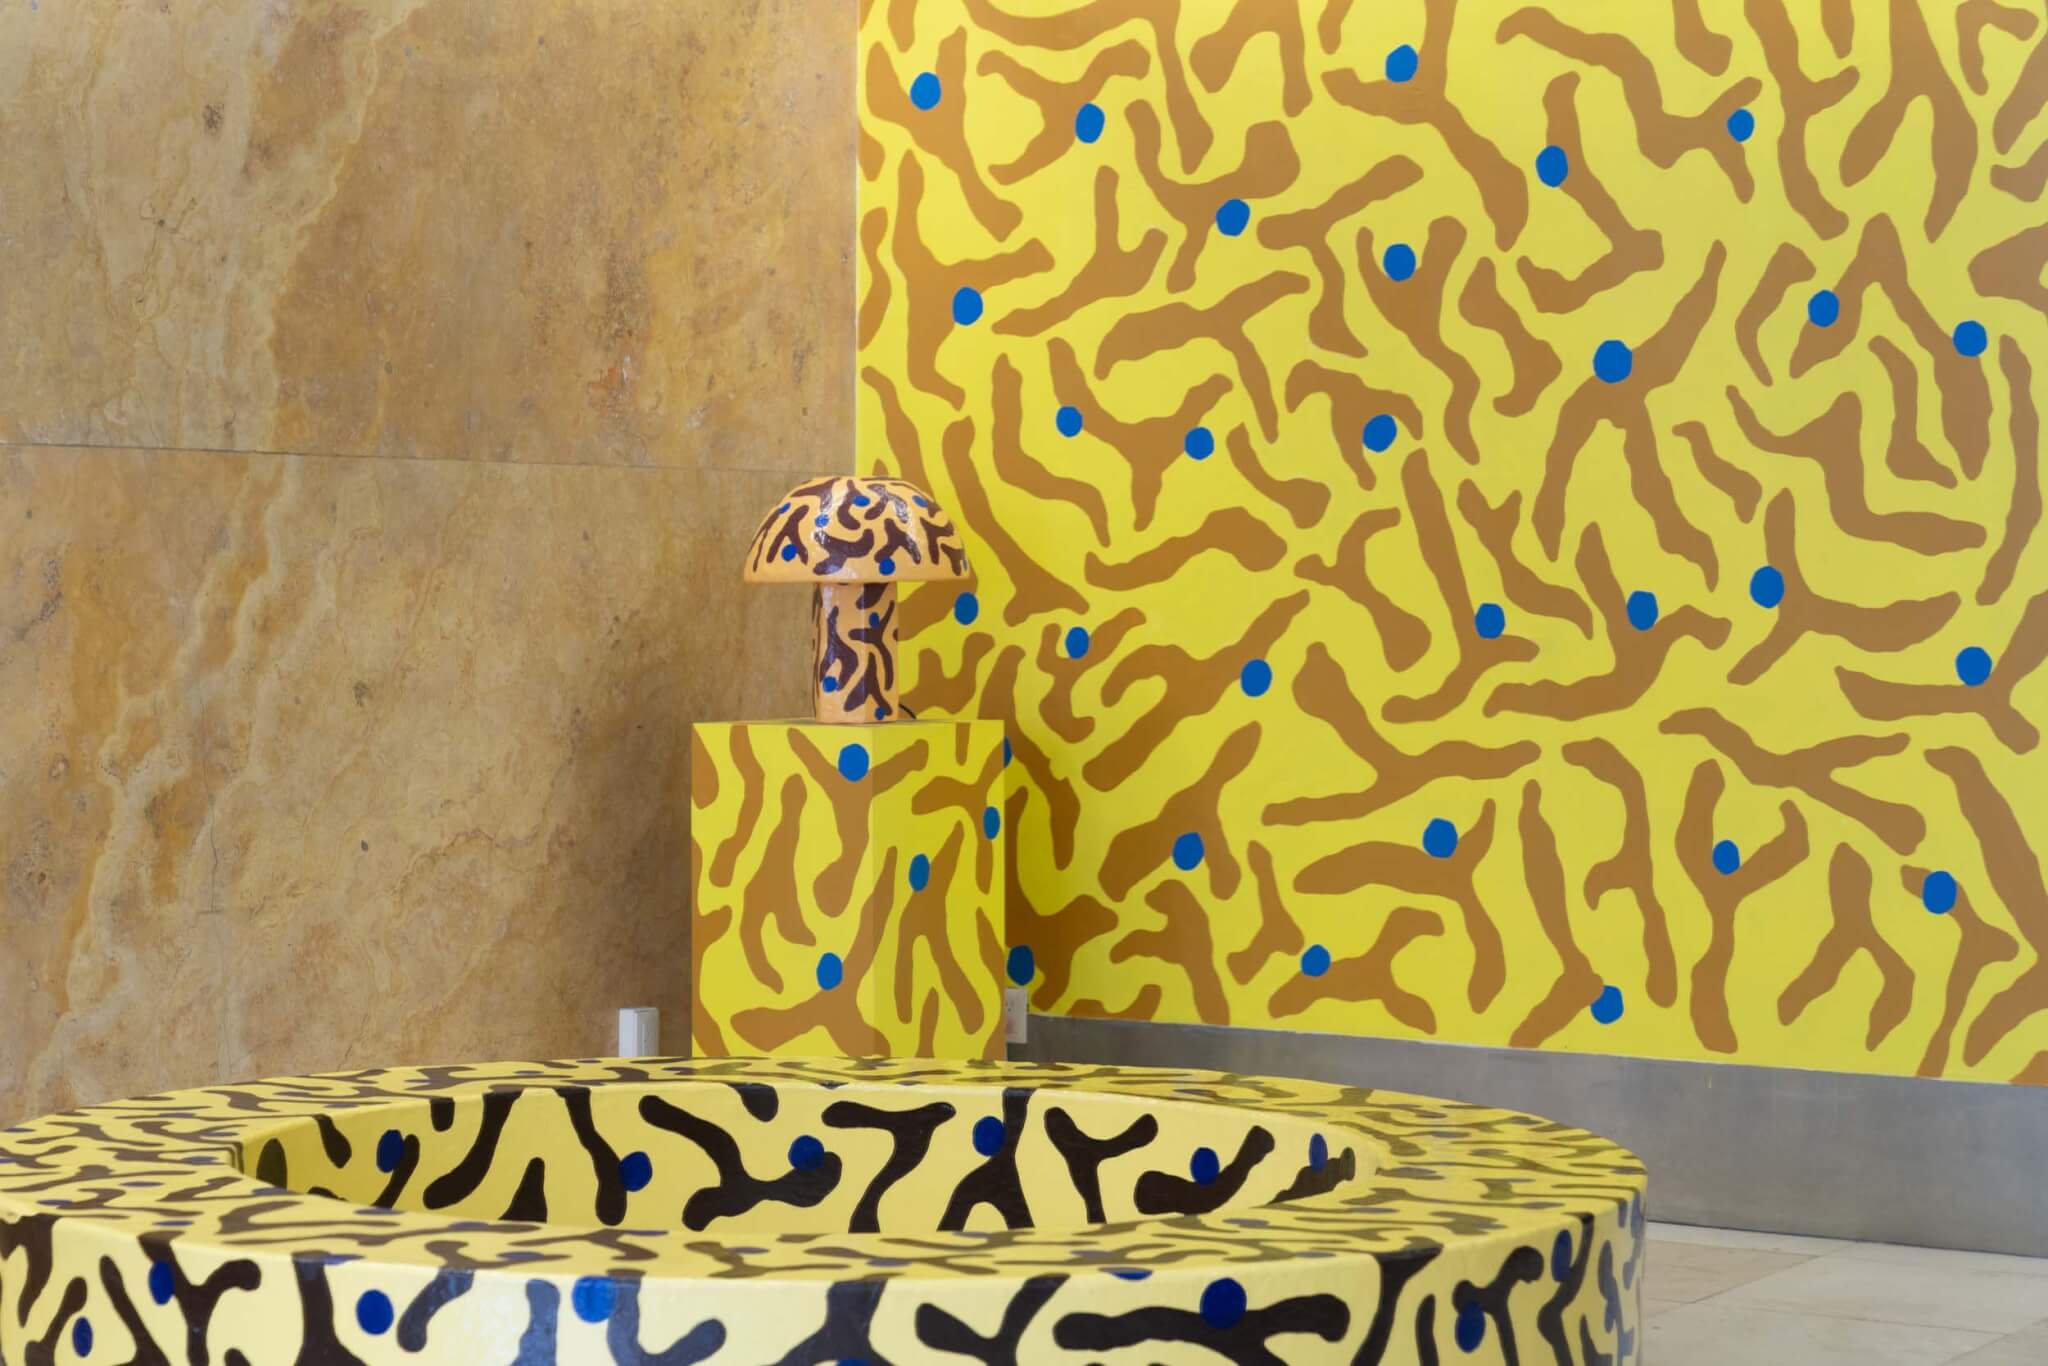 yellow patterned table, lamp, and wall